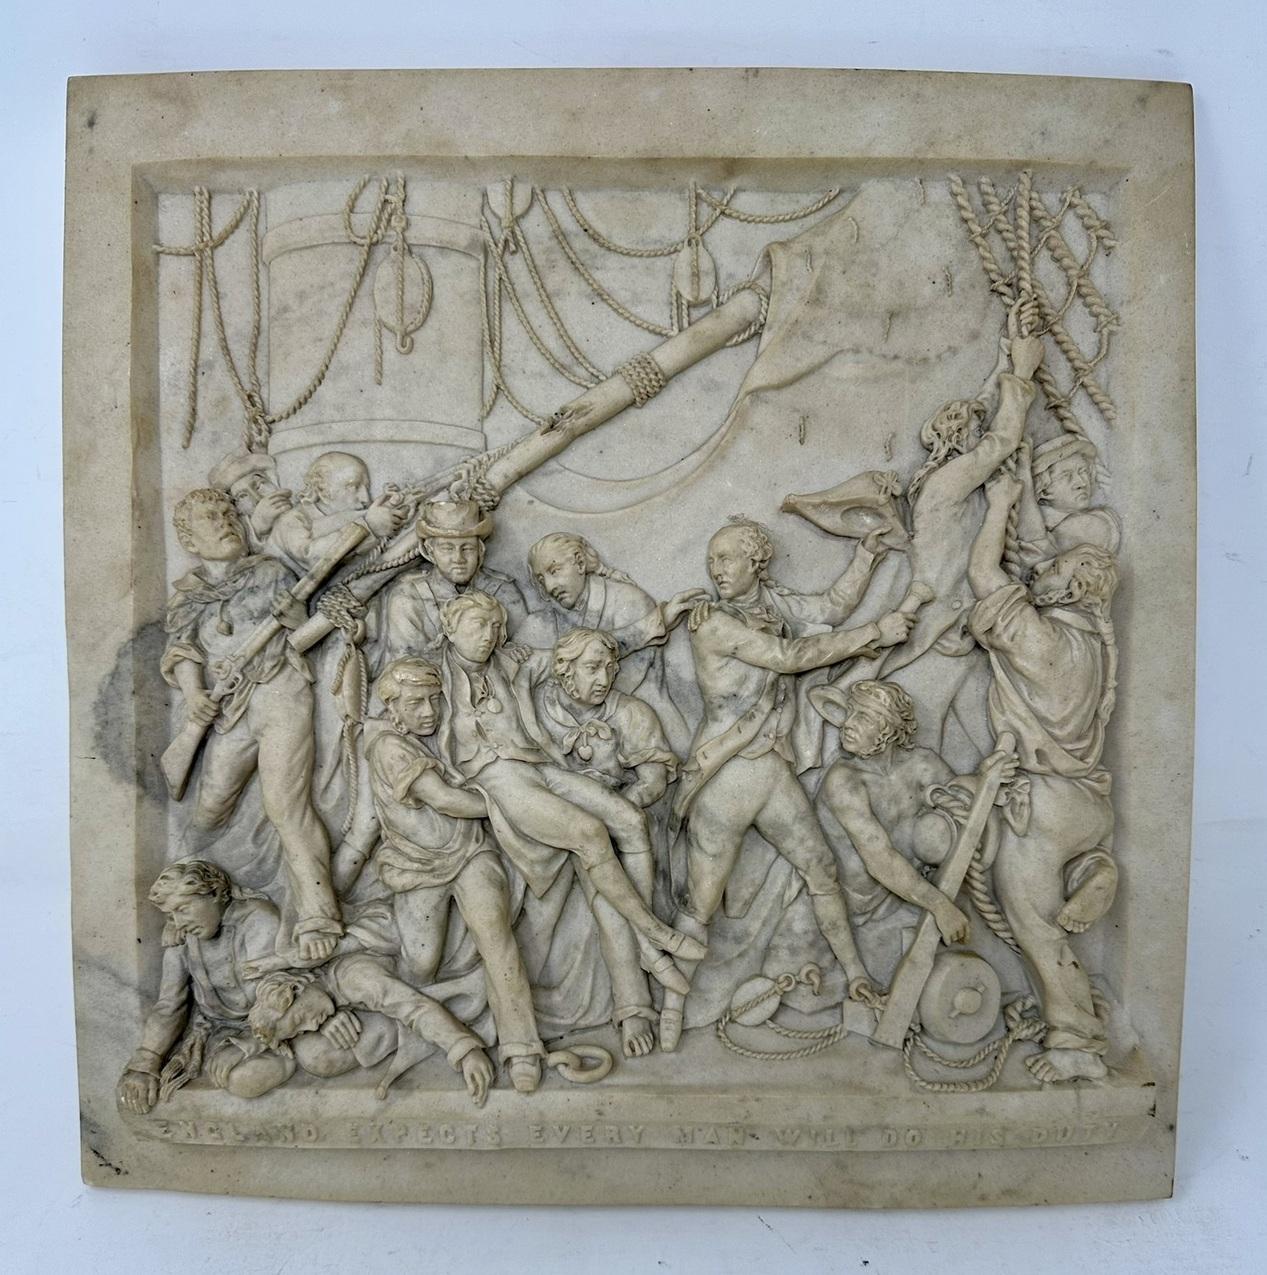 Superb and quite rare example of an exquisitely hand carved in really seldom seen high relief rectangular Marble Plaque depicting the “Battle of Trafalgar” scene of generous size, early Nineteenth Century, dated 1805 

Inscription at bottom “ENGLAND